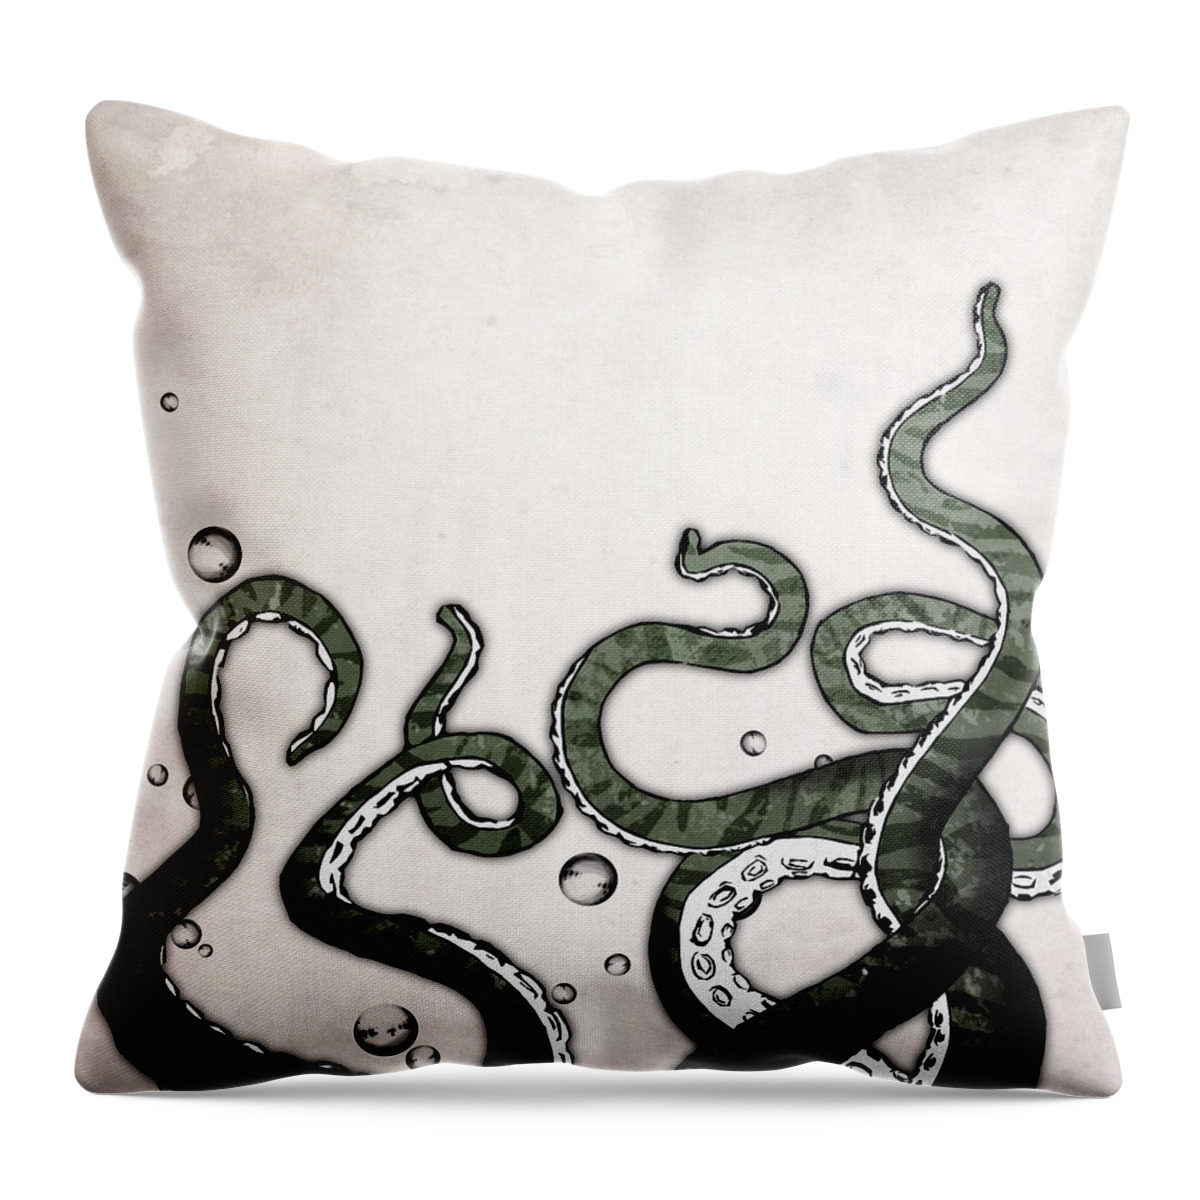 Octopus Throw Pillow featuring the digital art Octopus Tentacles by Nicklas Gustafsson